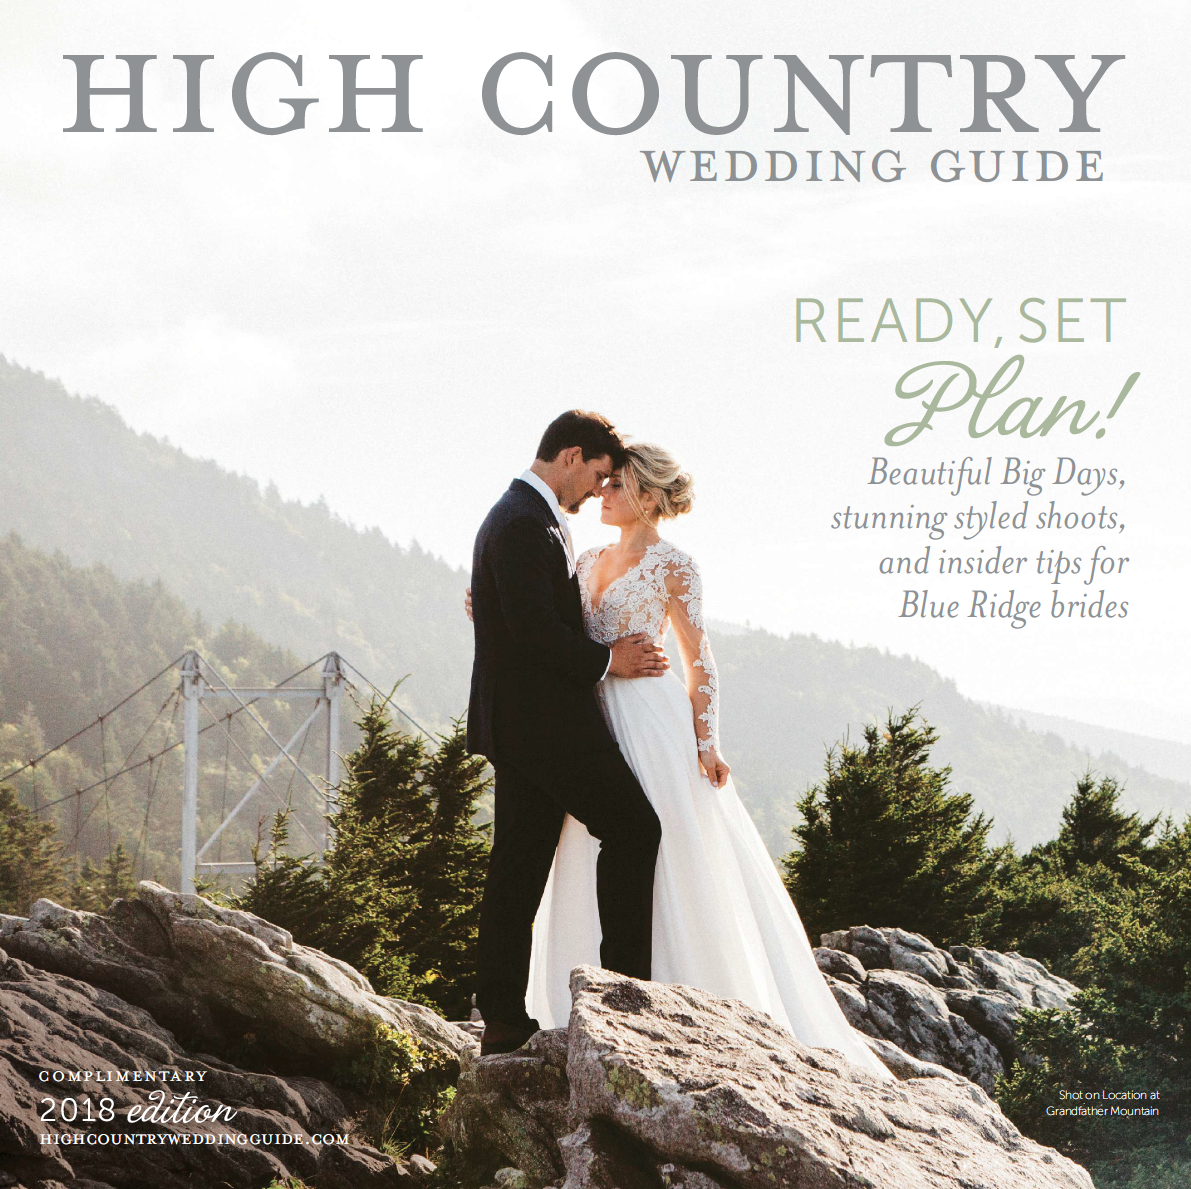 Whitney + Matthew's Destination Elopement Featured in the High Country Wedding Guide 2018 Issue www.revivalphotography.com